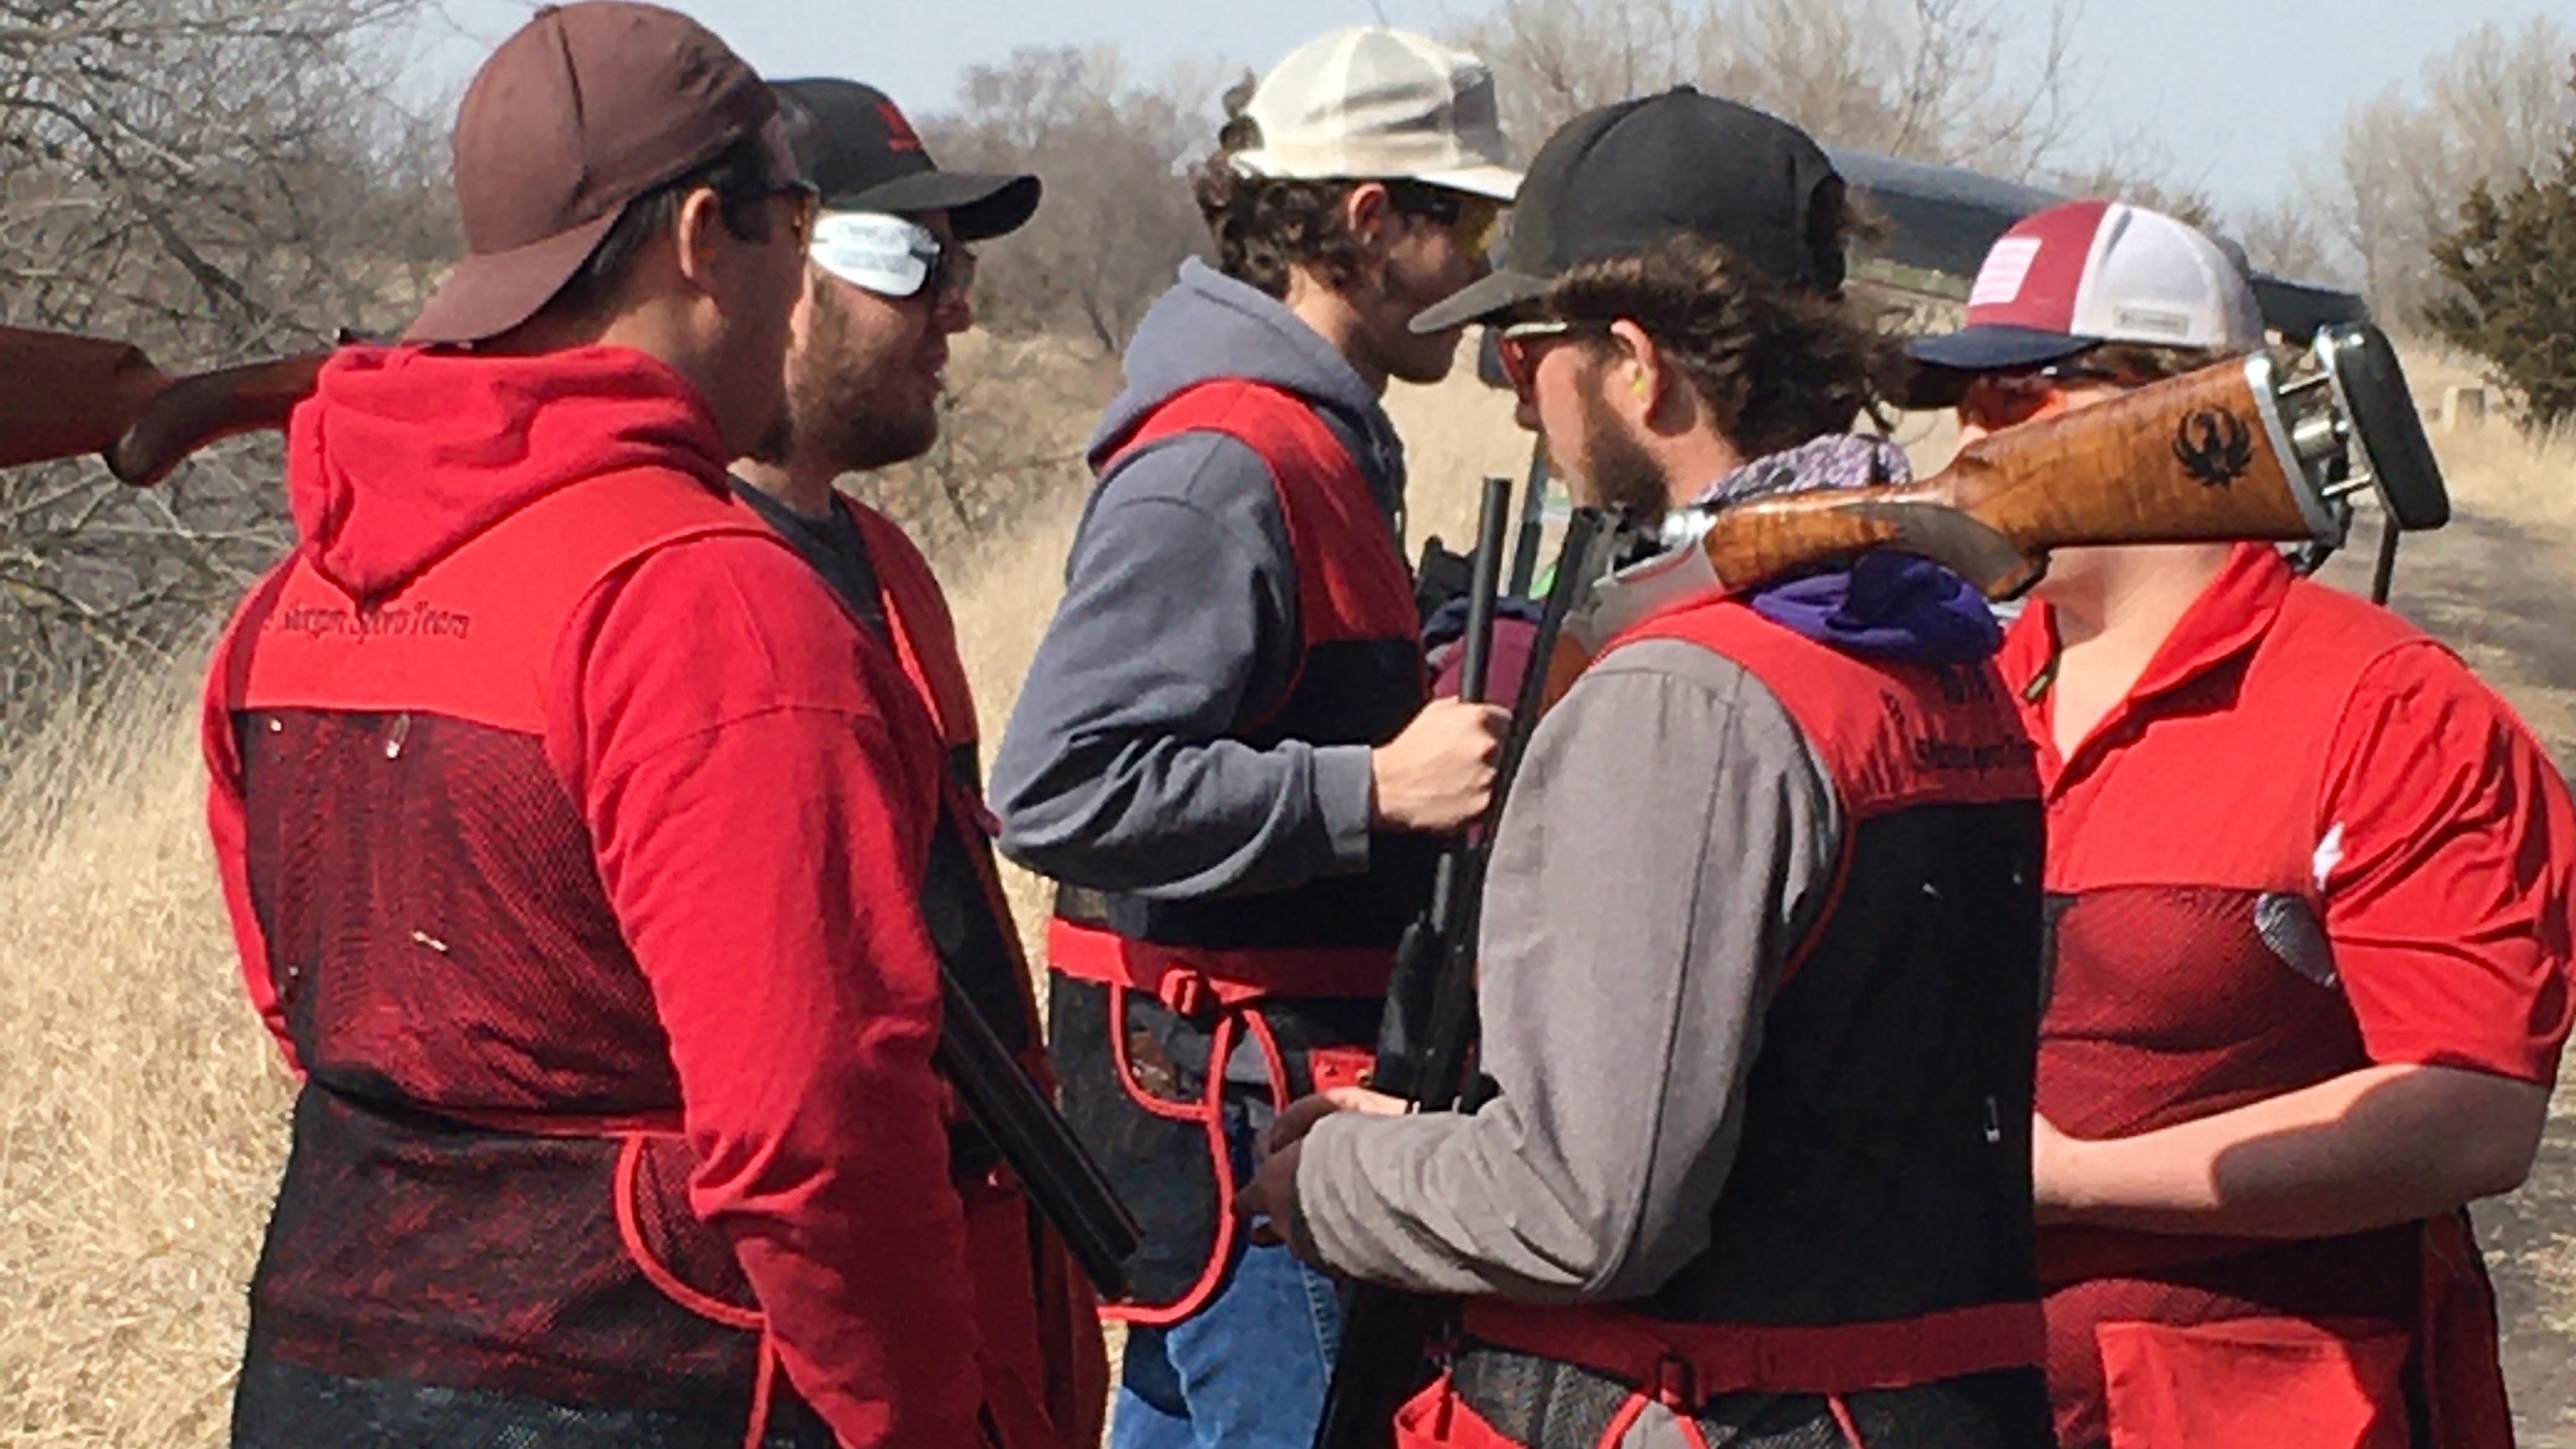 The NCTA Shotgun Sports Team competed in Lincoln last weekend and travels this Saturday to Hays, Kansas. (Photo by Alan Taylor / NCTA)